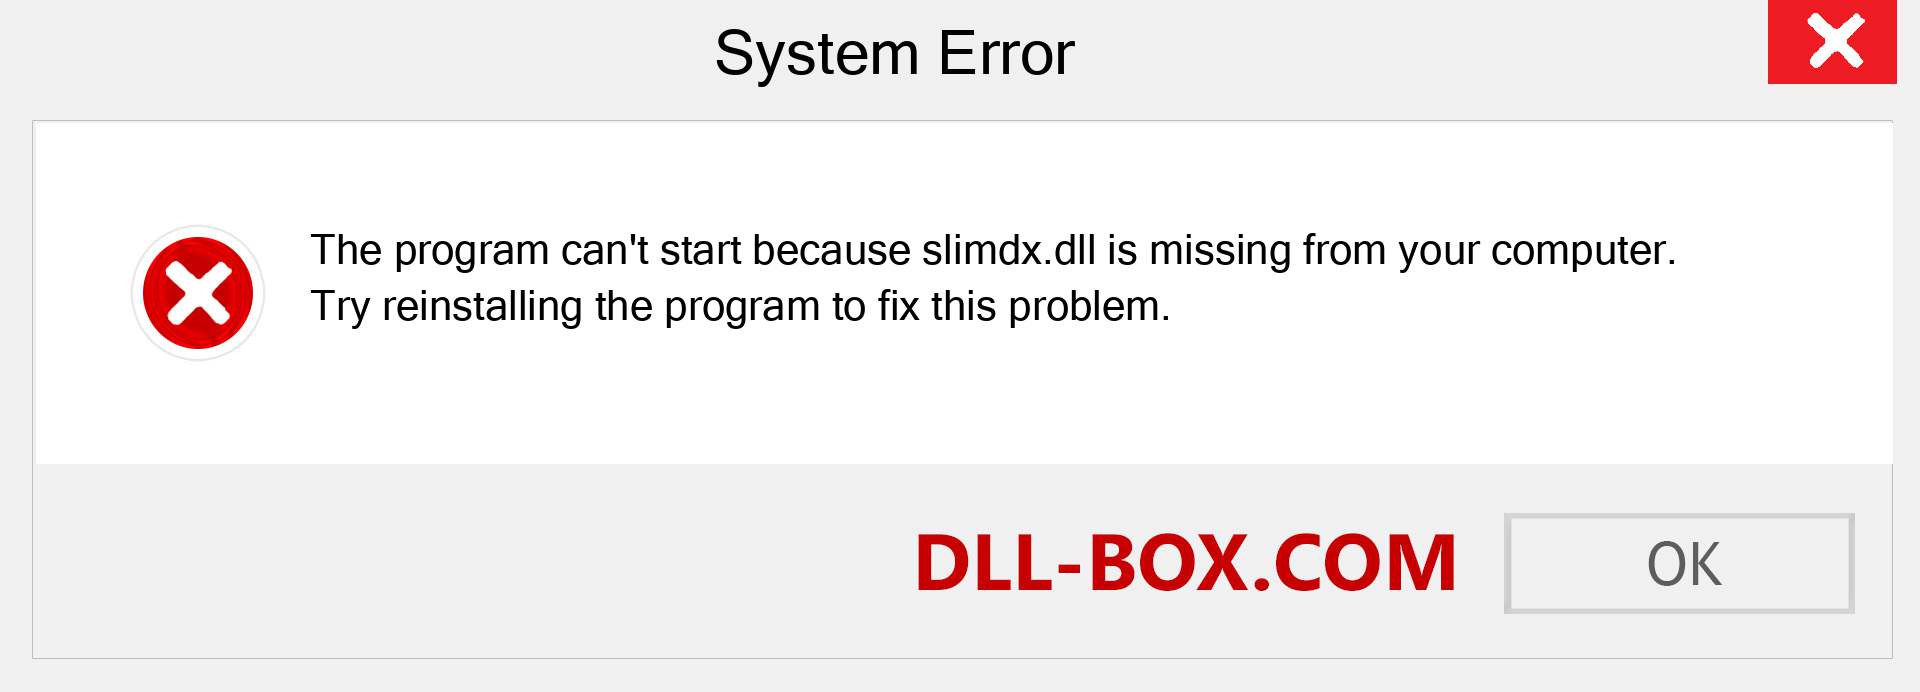  slimdx.dll file is missing?. Download for Windows 7, 8, 10 - Fix  slimdx dll Missing Error on Windows, photos, images